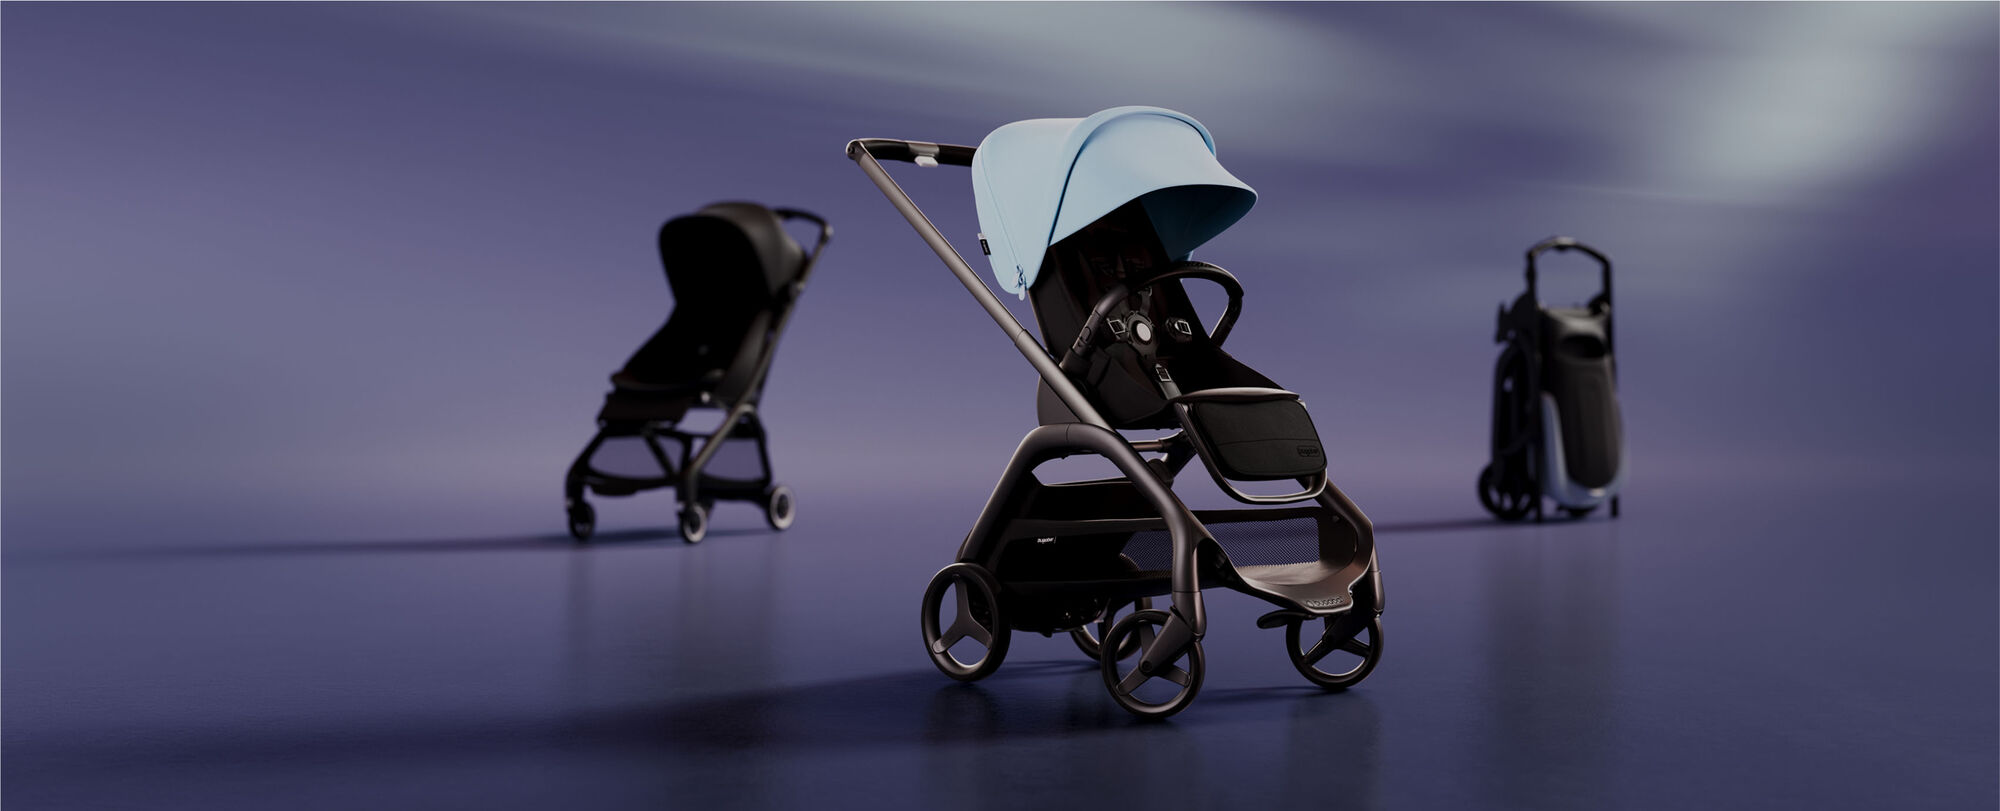 A lineup of 3 strollers. At the front is a Bugaboo Dragonfly with Skyline Blue sun canopy. On the left is a Bugaboo Butterfly with Midnight Black fabrics. On the right is a self-standing folded Bugaboo Dragonfly.